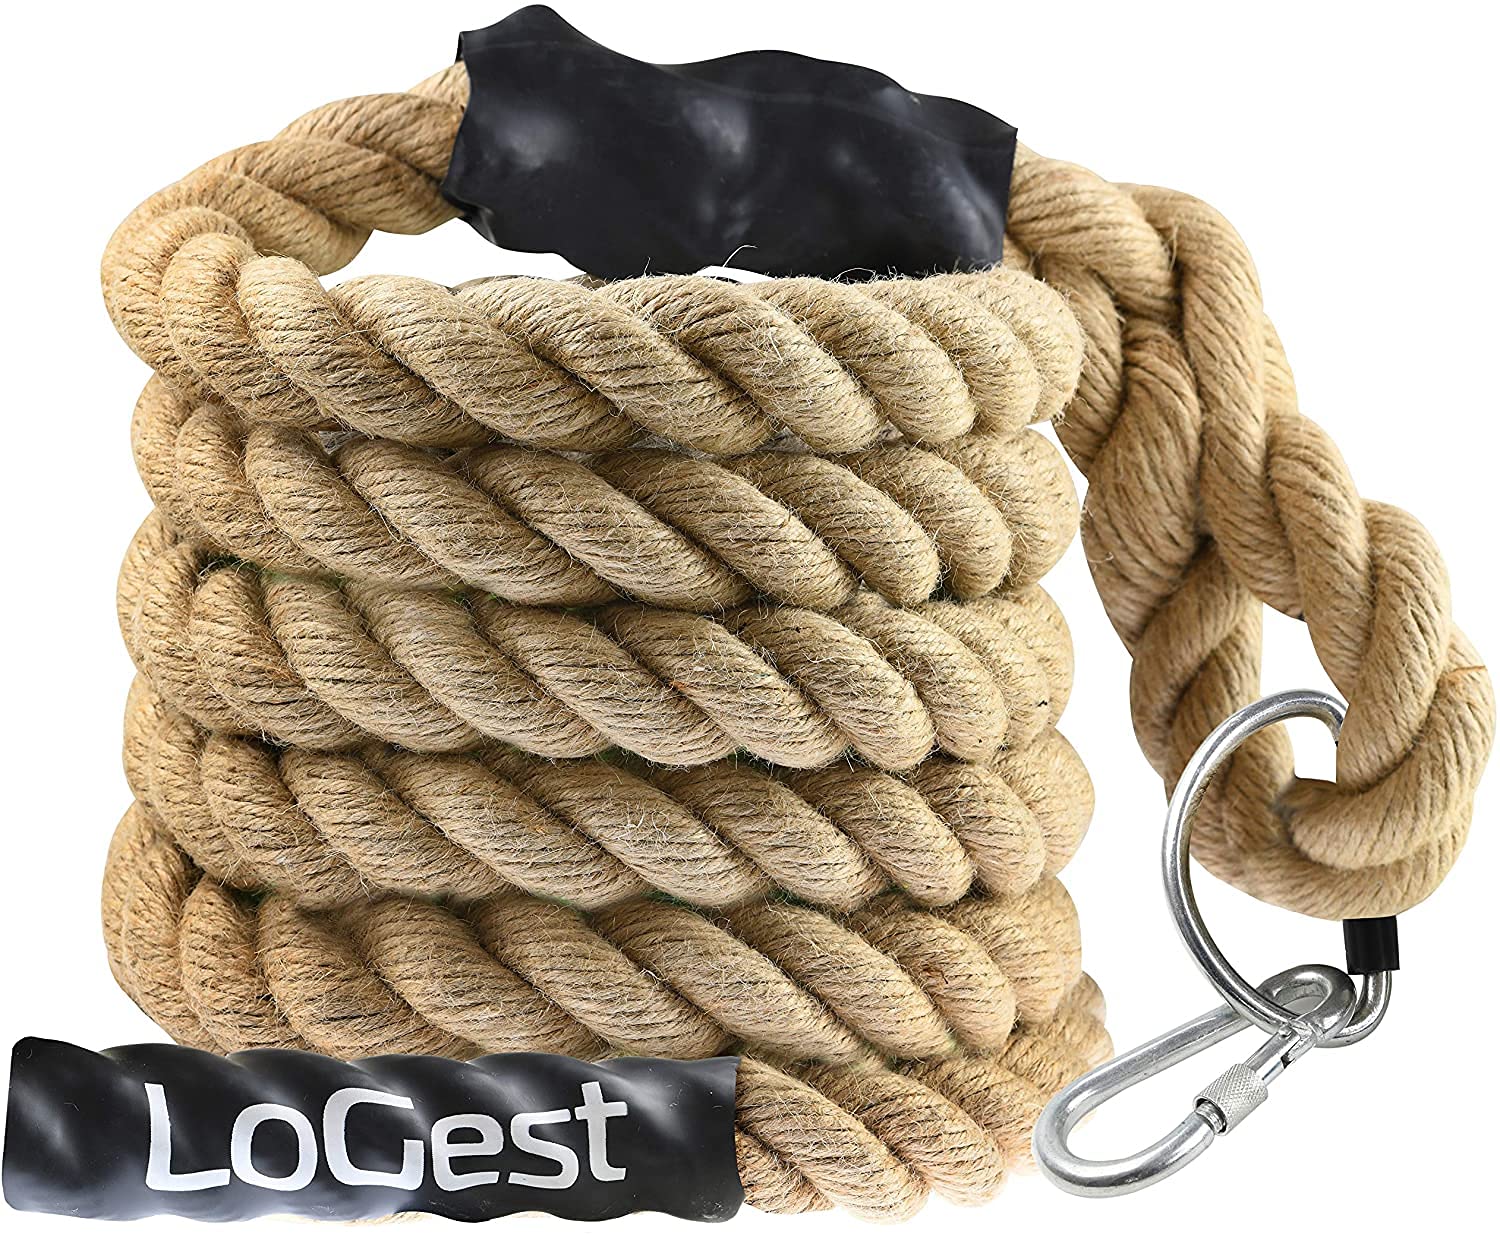 Logest Climbing Rope - Indoor and Outdoor Workout Rope 1.5 Diameter - 10 15  20 25 30 50 Feet 6 Lengths Available Perfect for Homes Gym Obstacle Courses  Crossfit Rope for 10FT With Hook